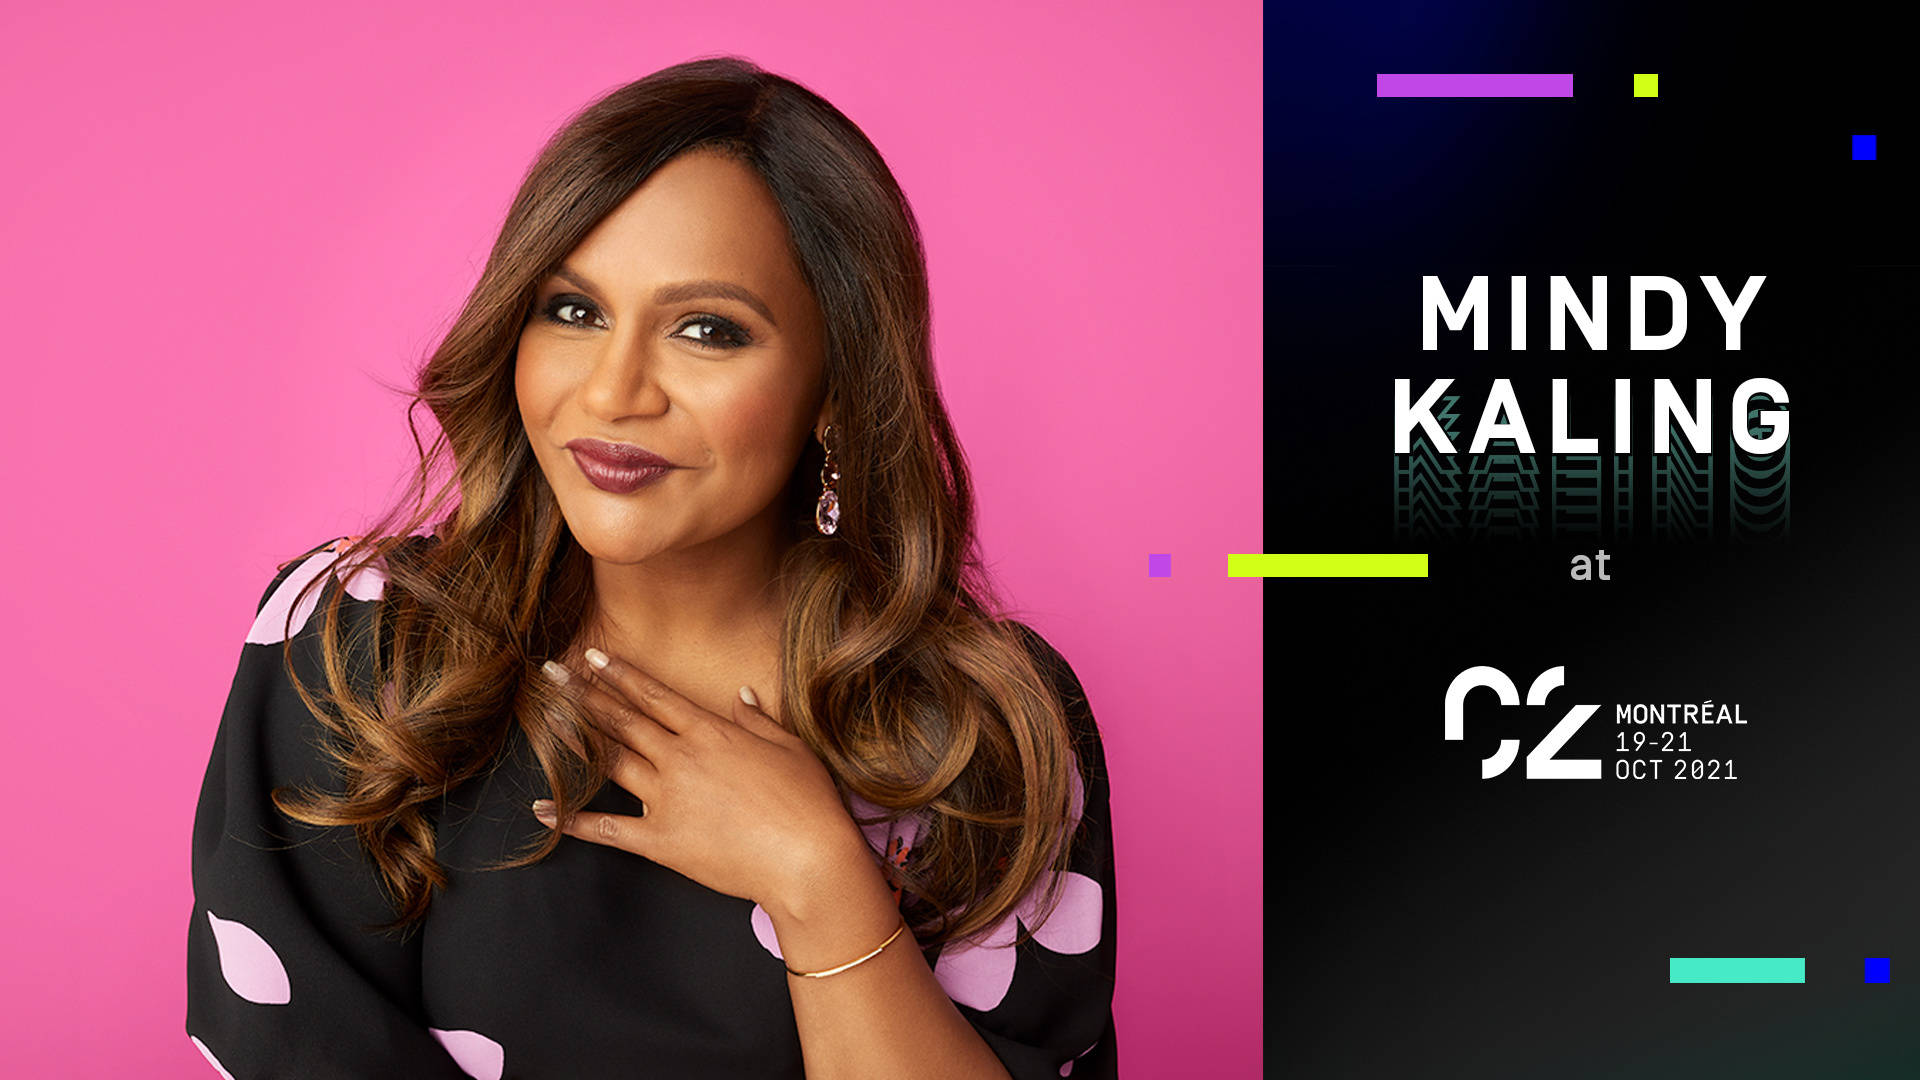 Mindy Kaling Smiling at the Montreal Event 2021 Wallpaper